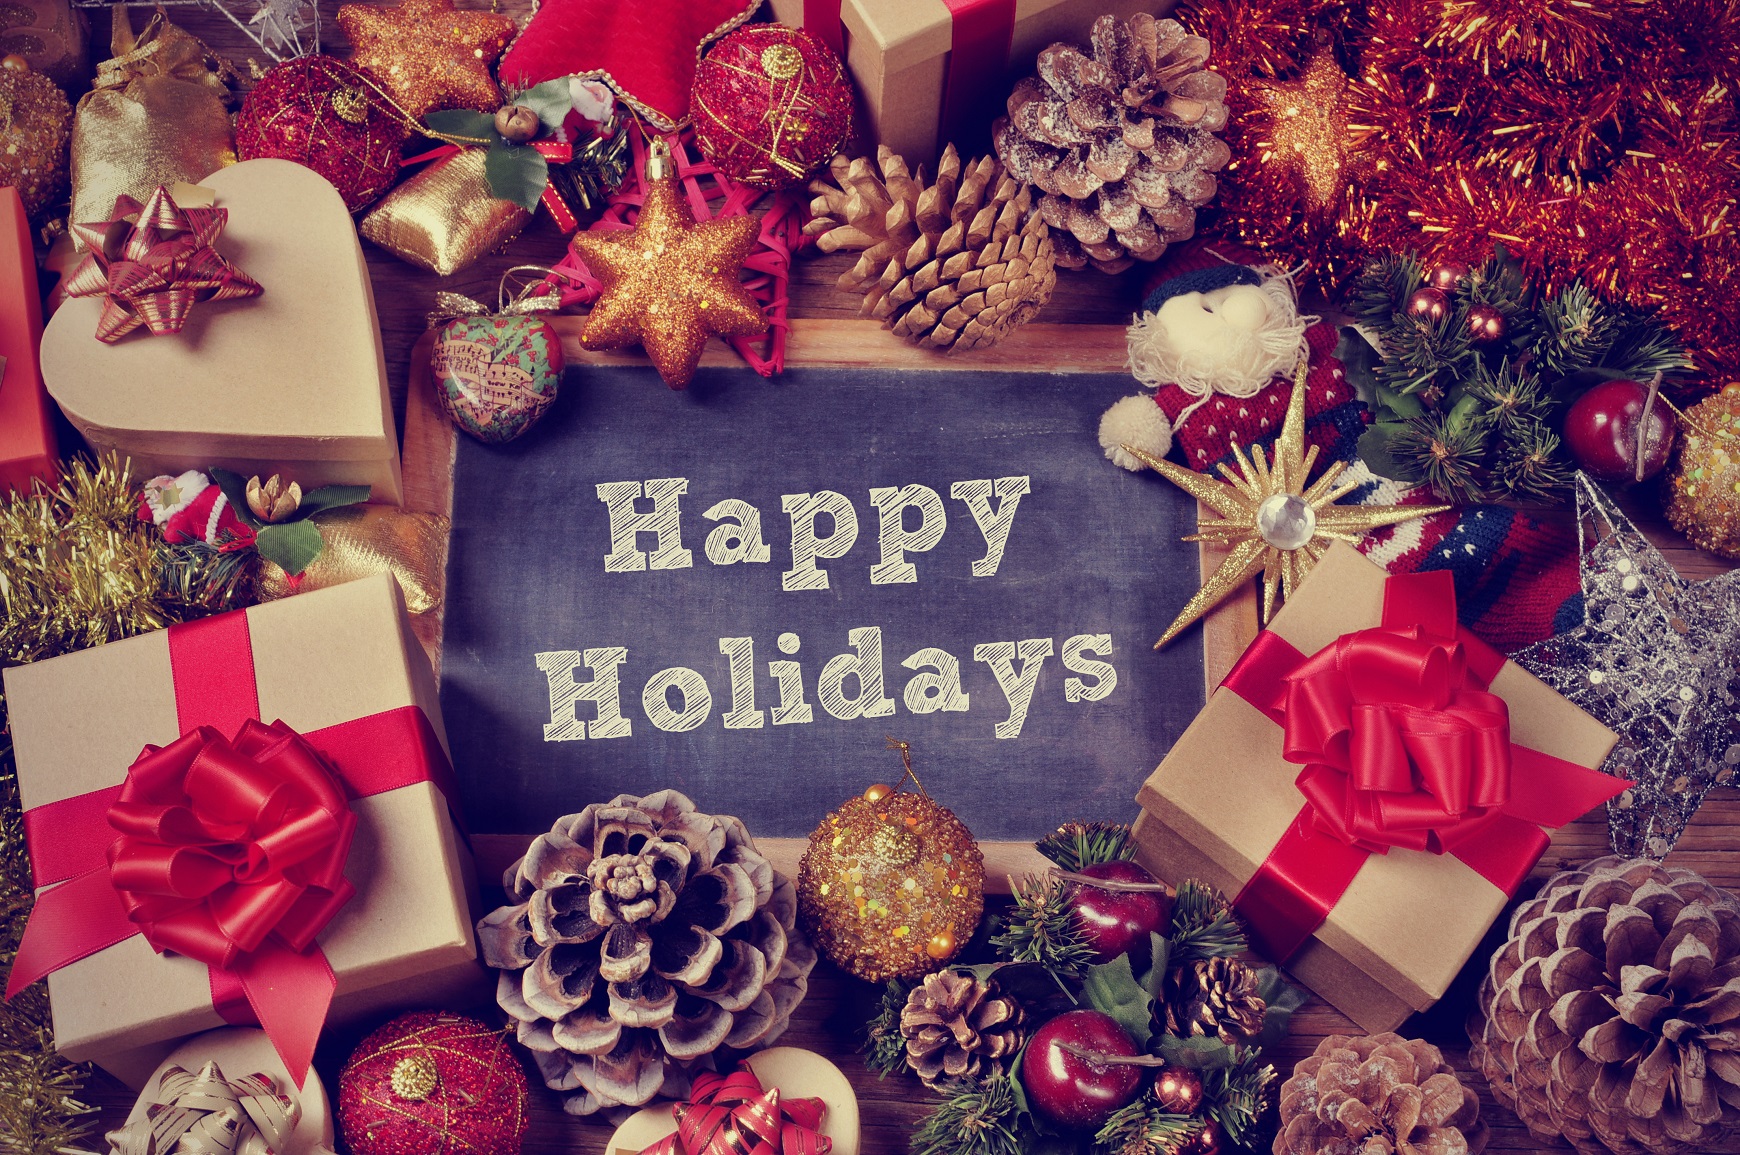 Agilites Congrats partners, clients, colleagues and friends on seasonal holidays